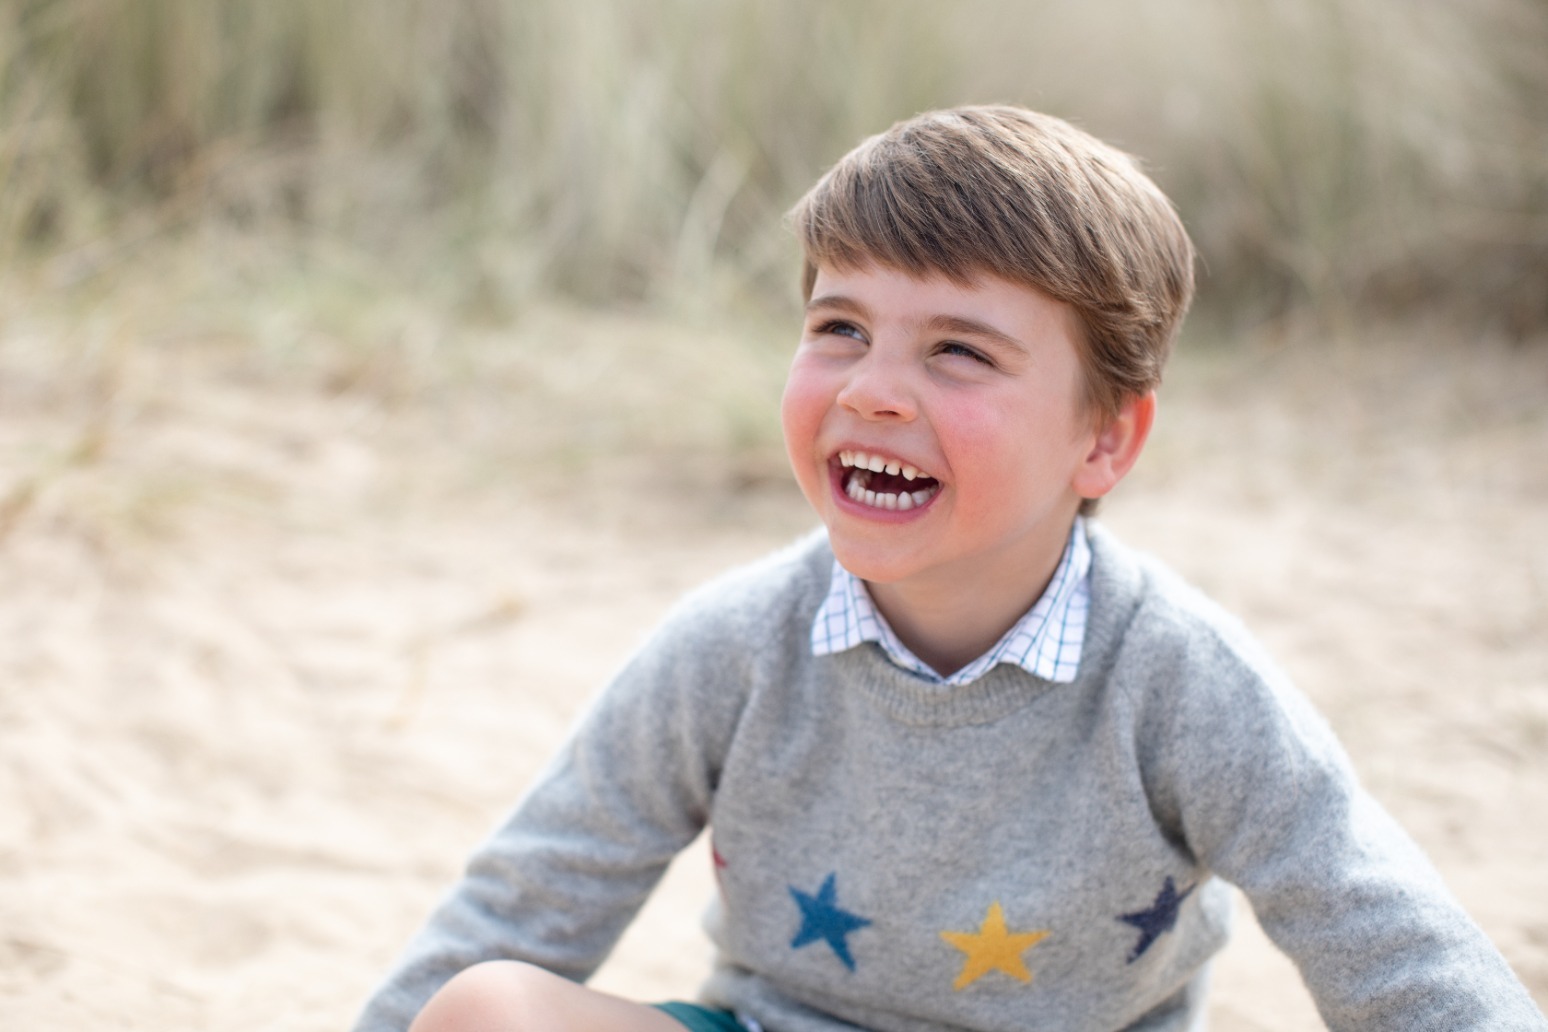 Pictures released of laughing Prince Louis to mark his fourth birthday 